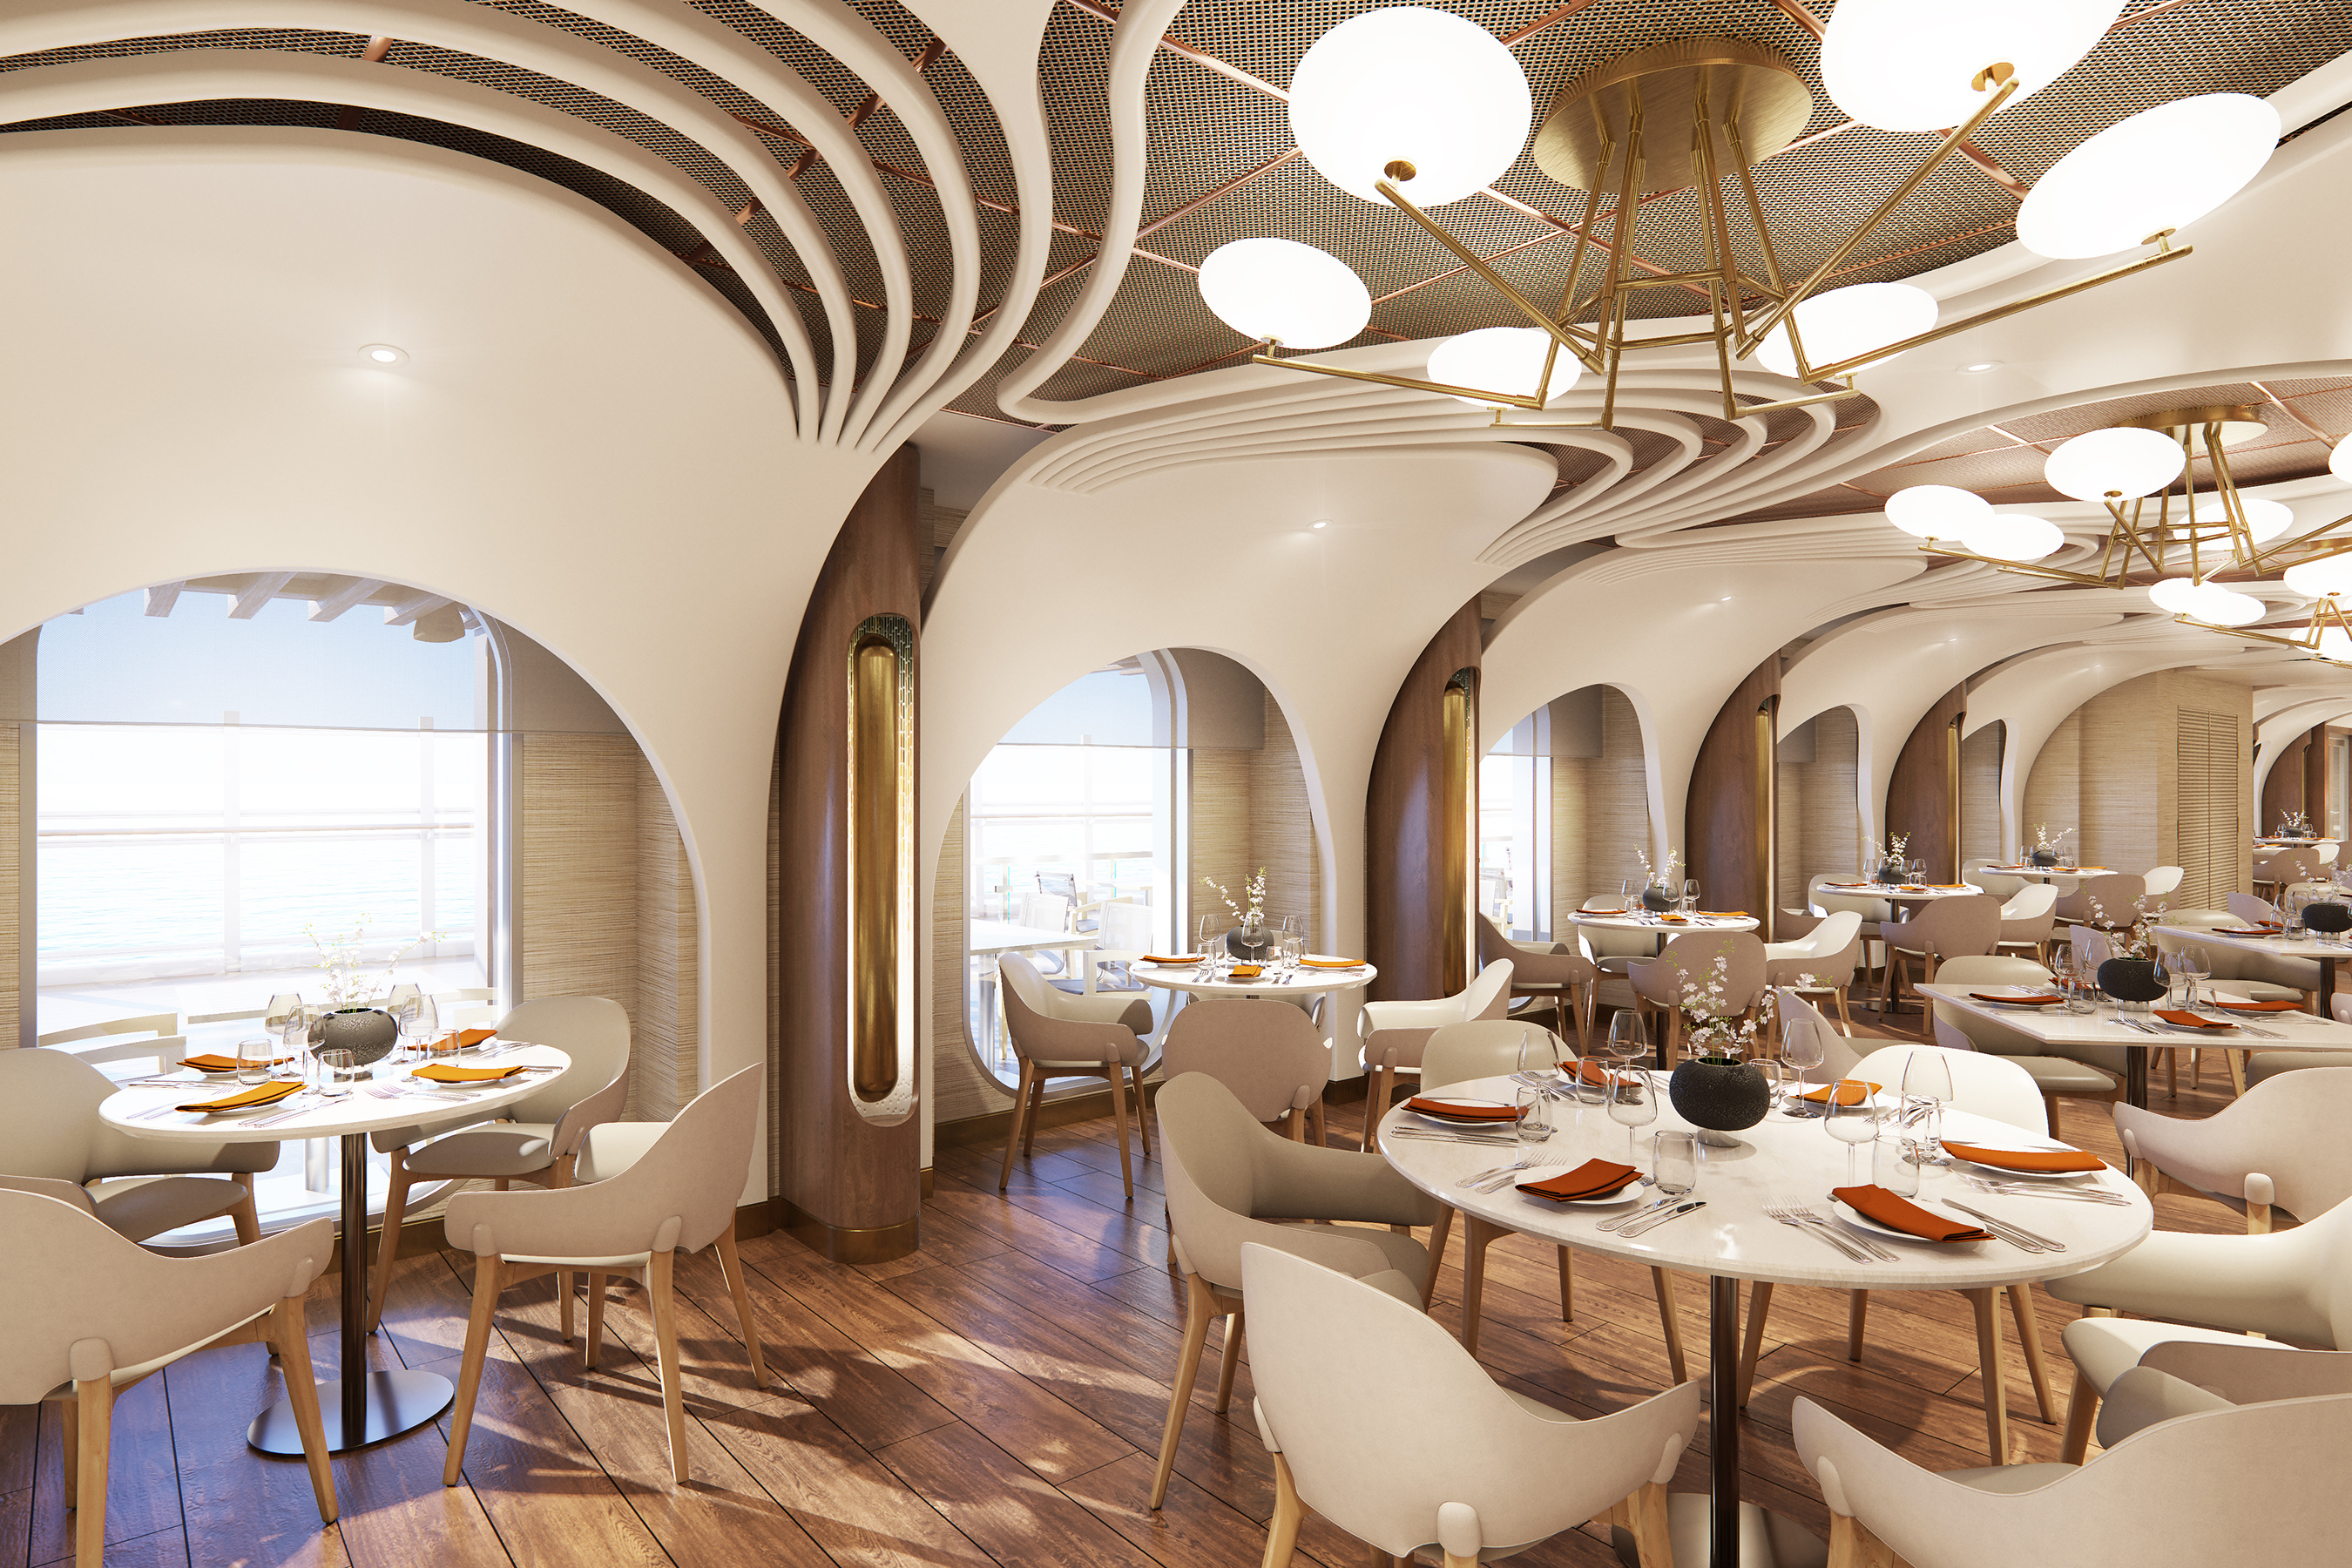 Onda by Scarpetta, the Italian restaurant on board Norwegian Viva, will offer expansive indoor and outdoor seating and will showcase the rich and bold flavors for which the modern Italian land-based, award-winning Scarpetta restaurants are recognized for.